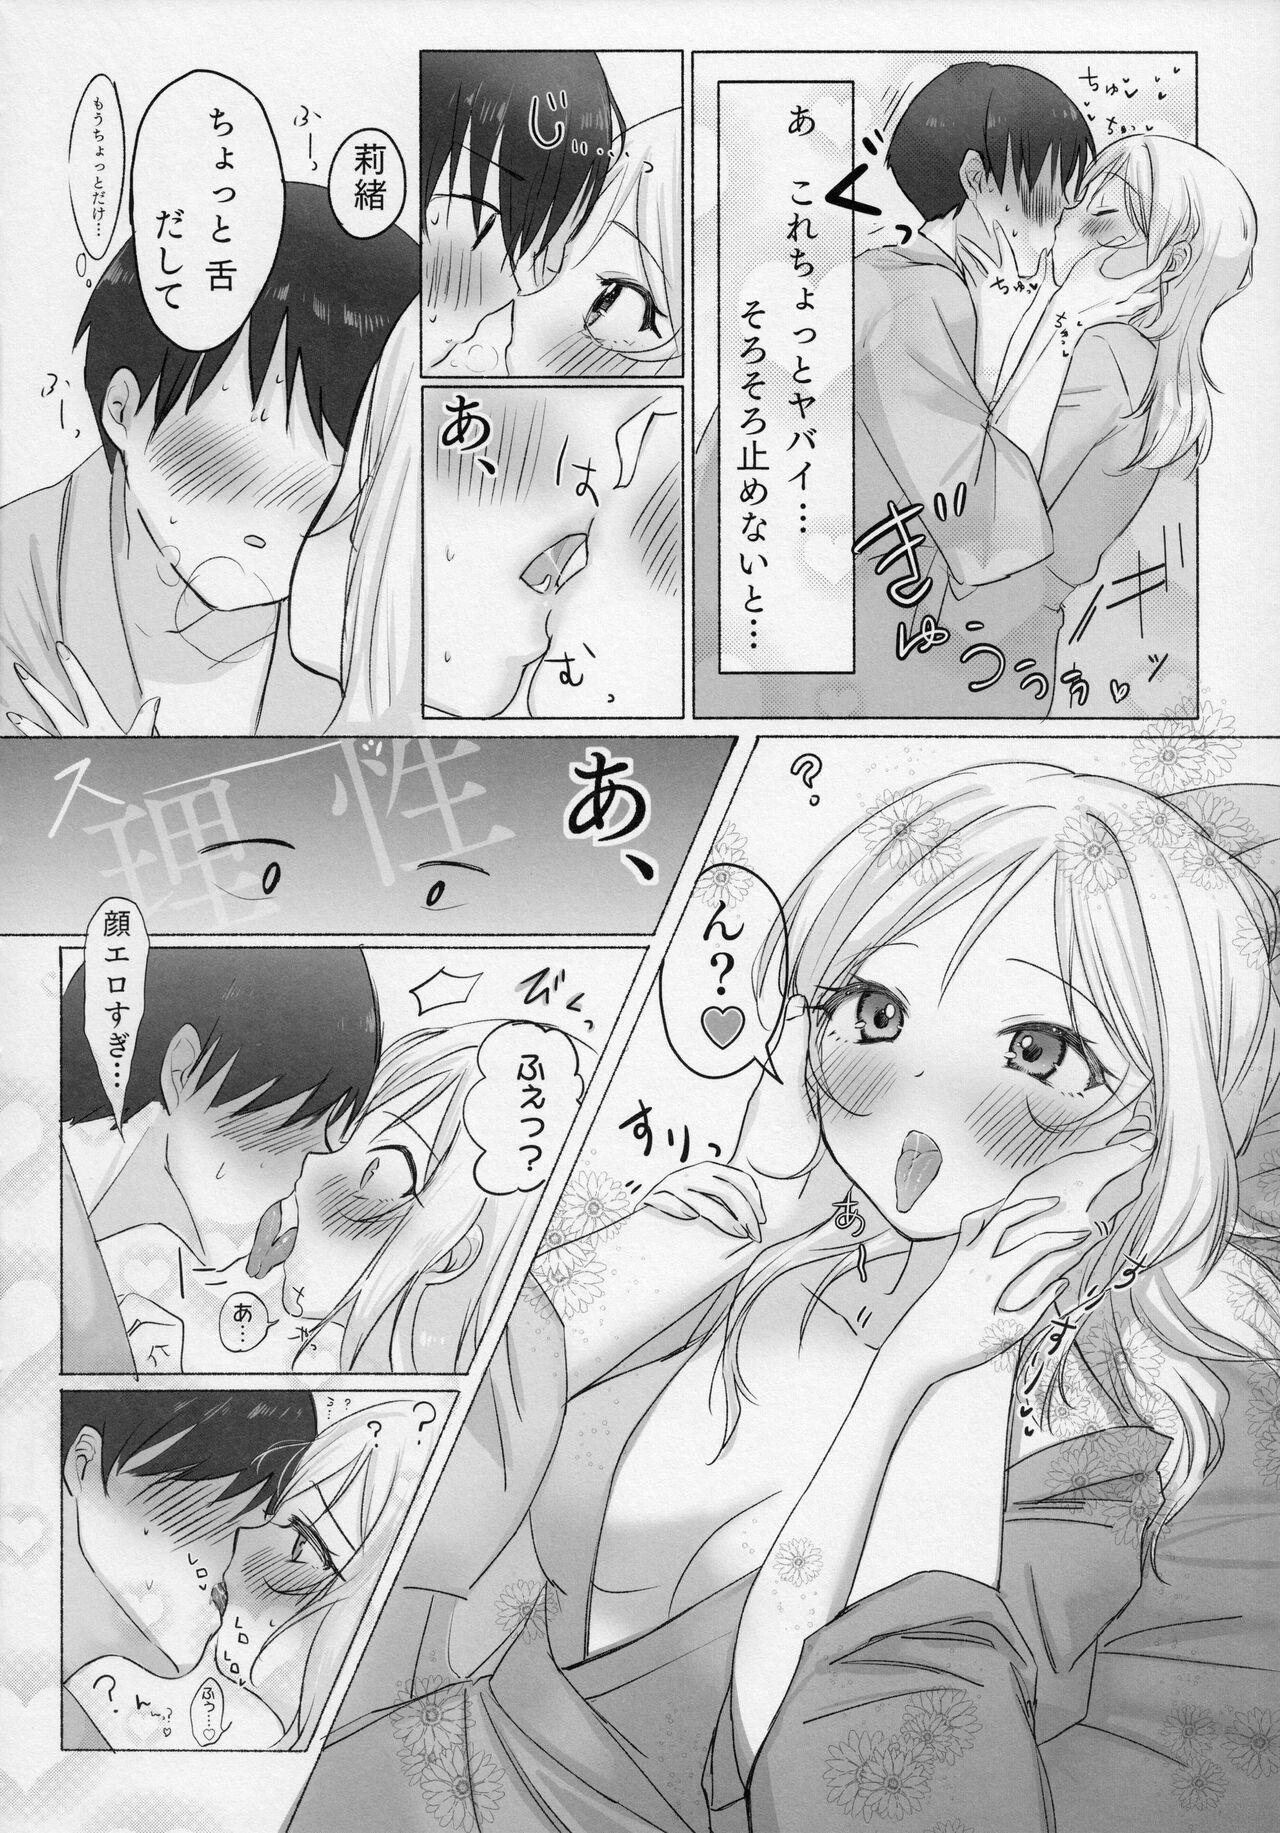 Dad By the way, Producer-kun, what do people do at a love hotel? - The idolmaster For - Page 9